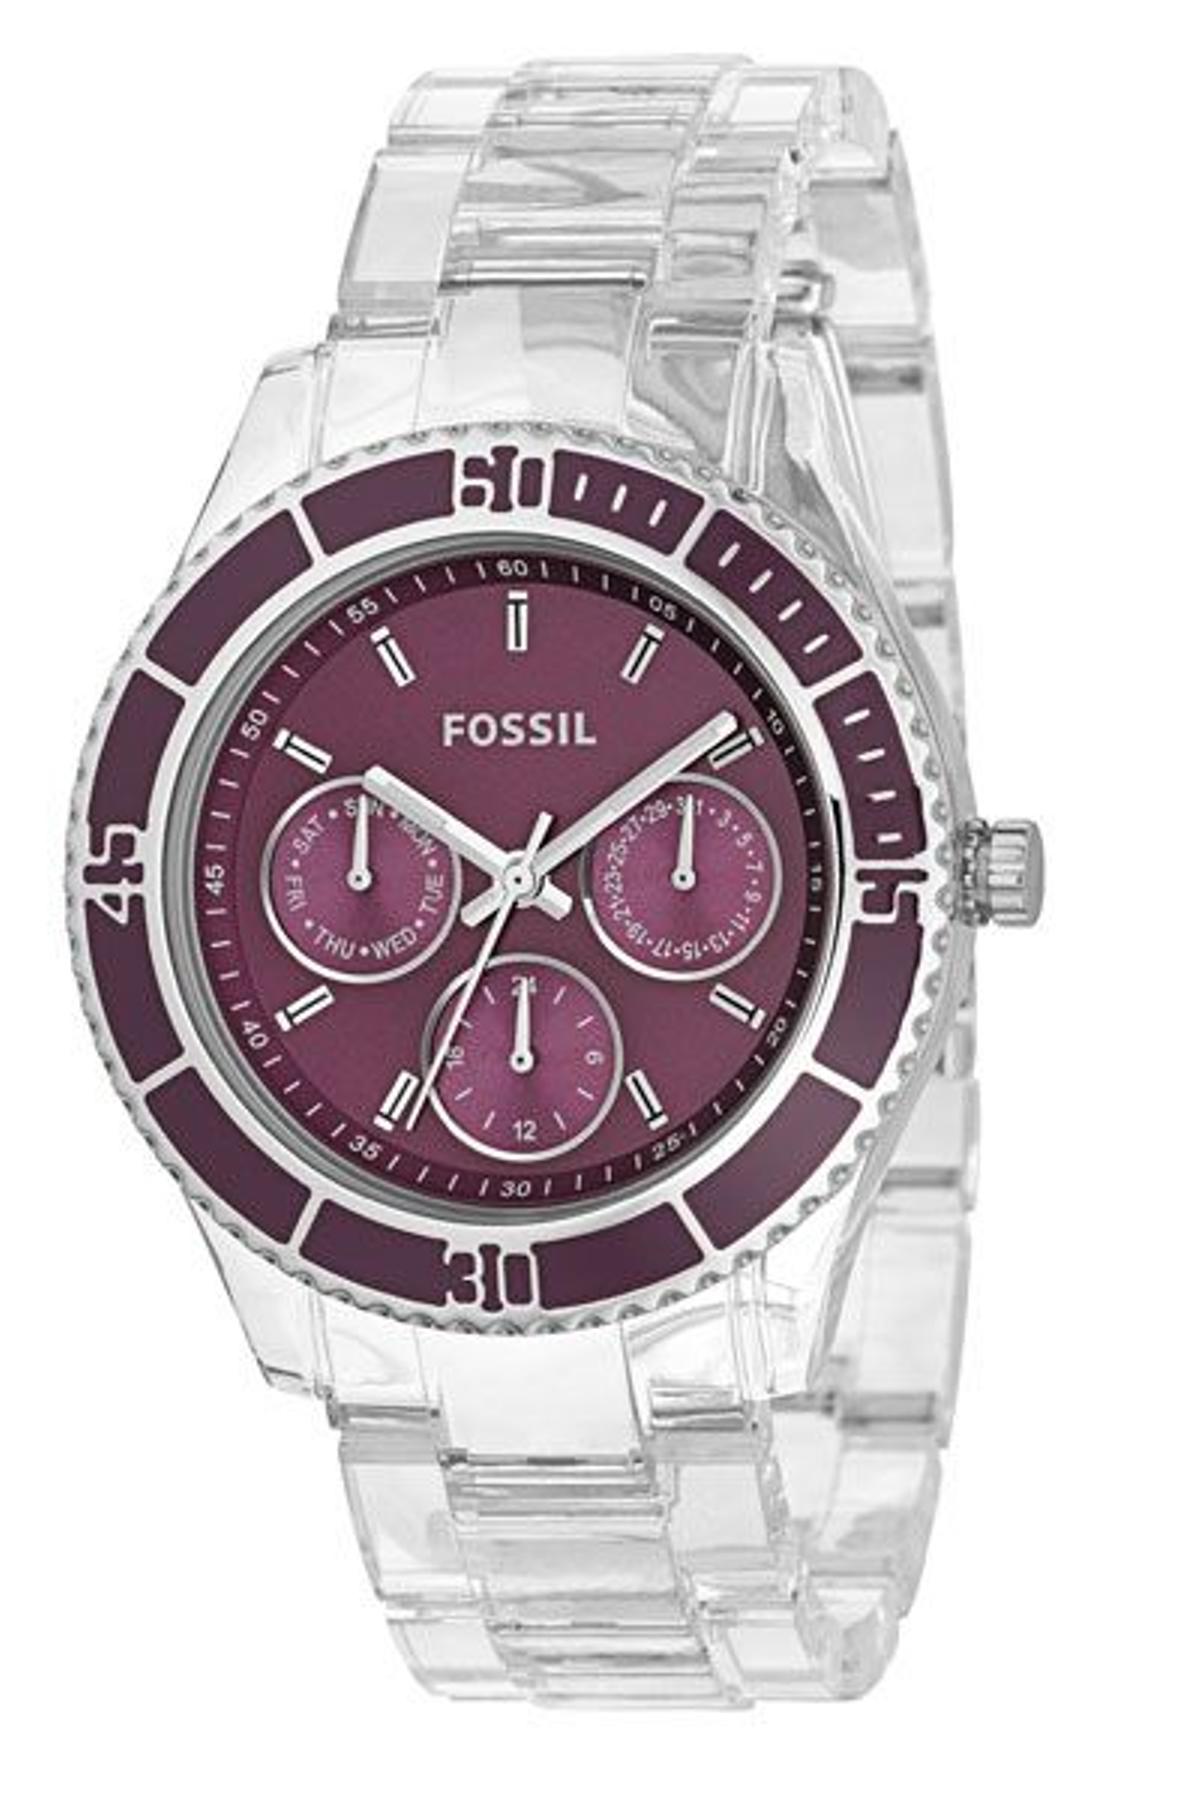 fossil2